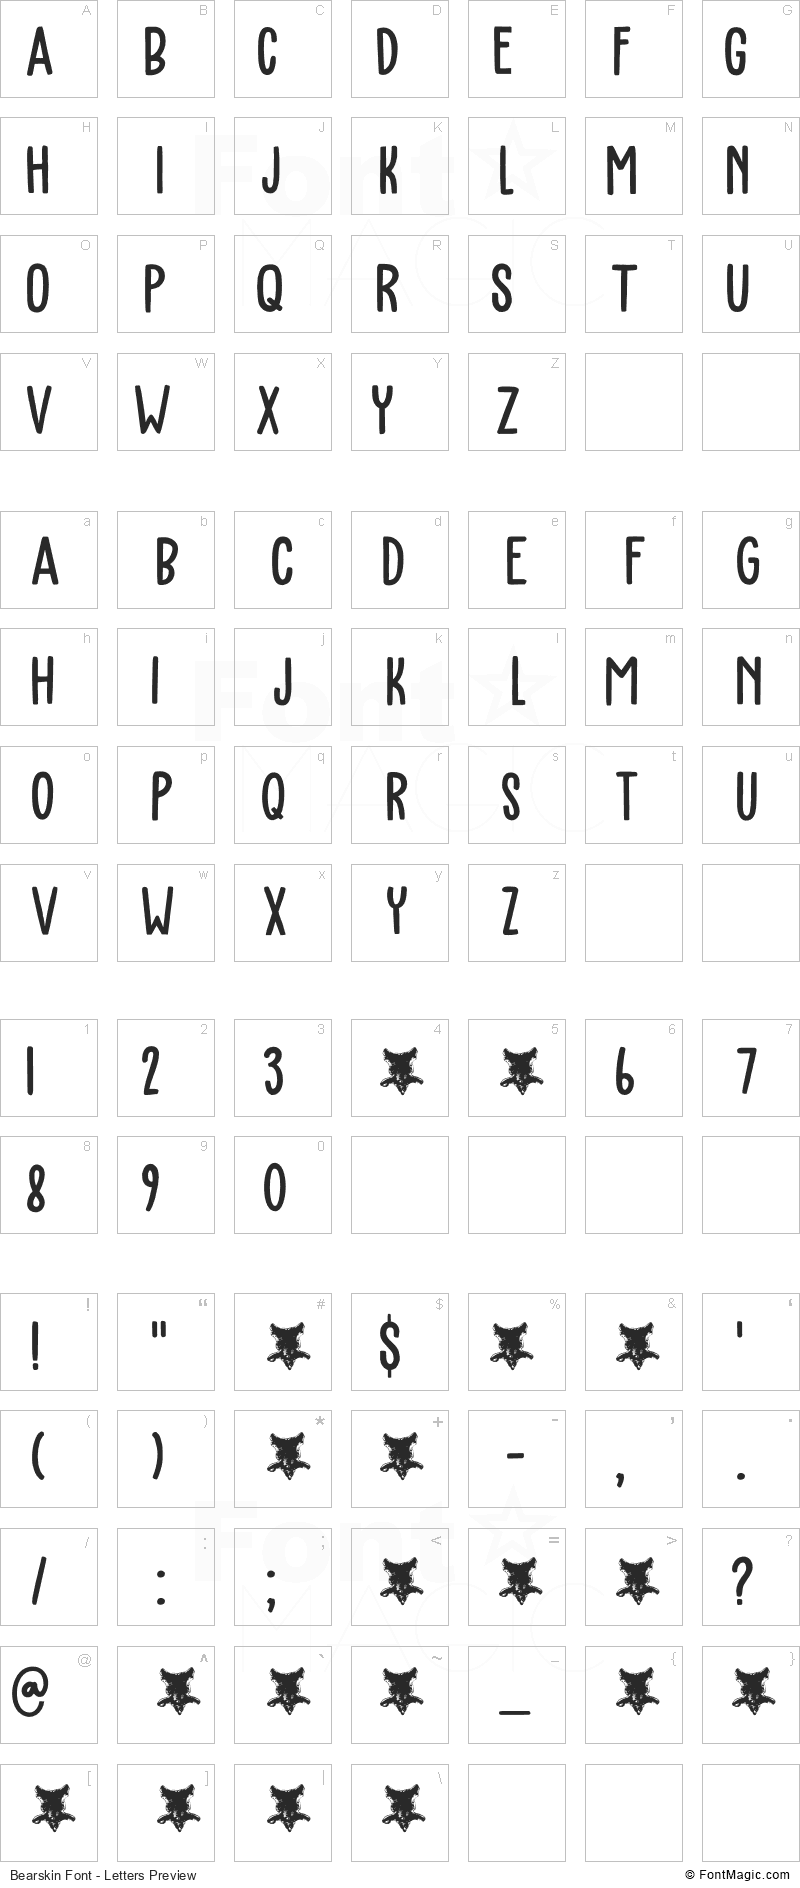 Bearskin Font - All Latters Preview Chart